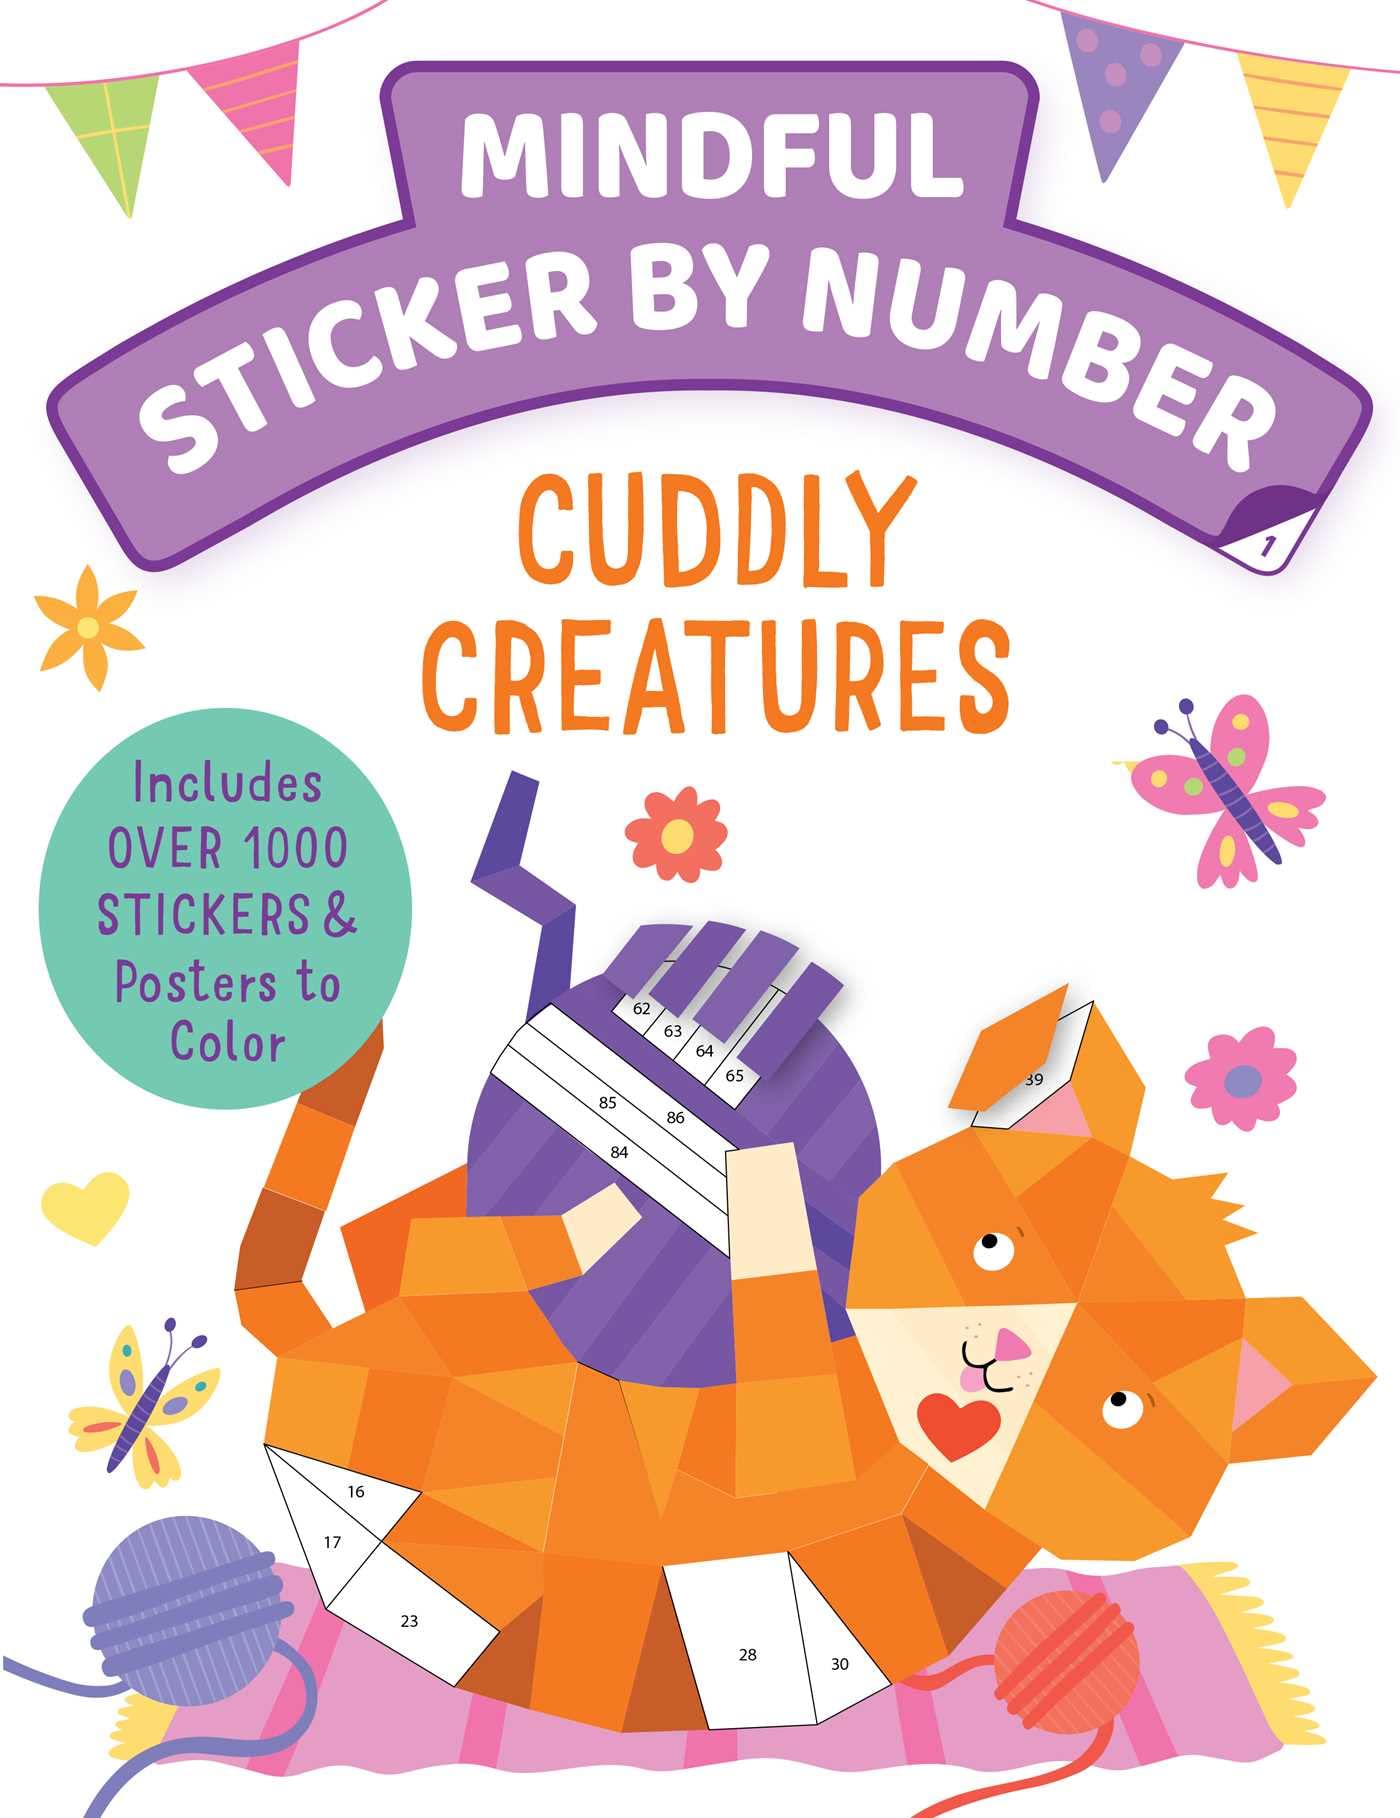 Mindful Sticker By Number: Cuddly Creatures